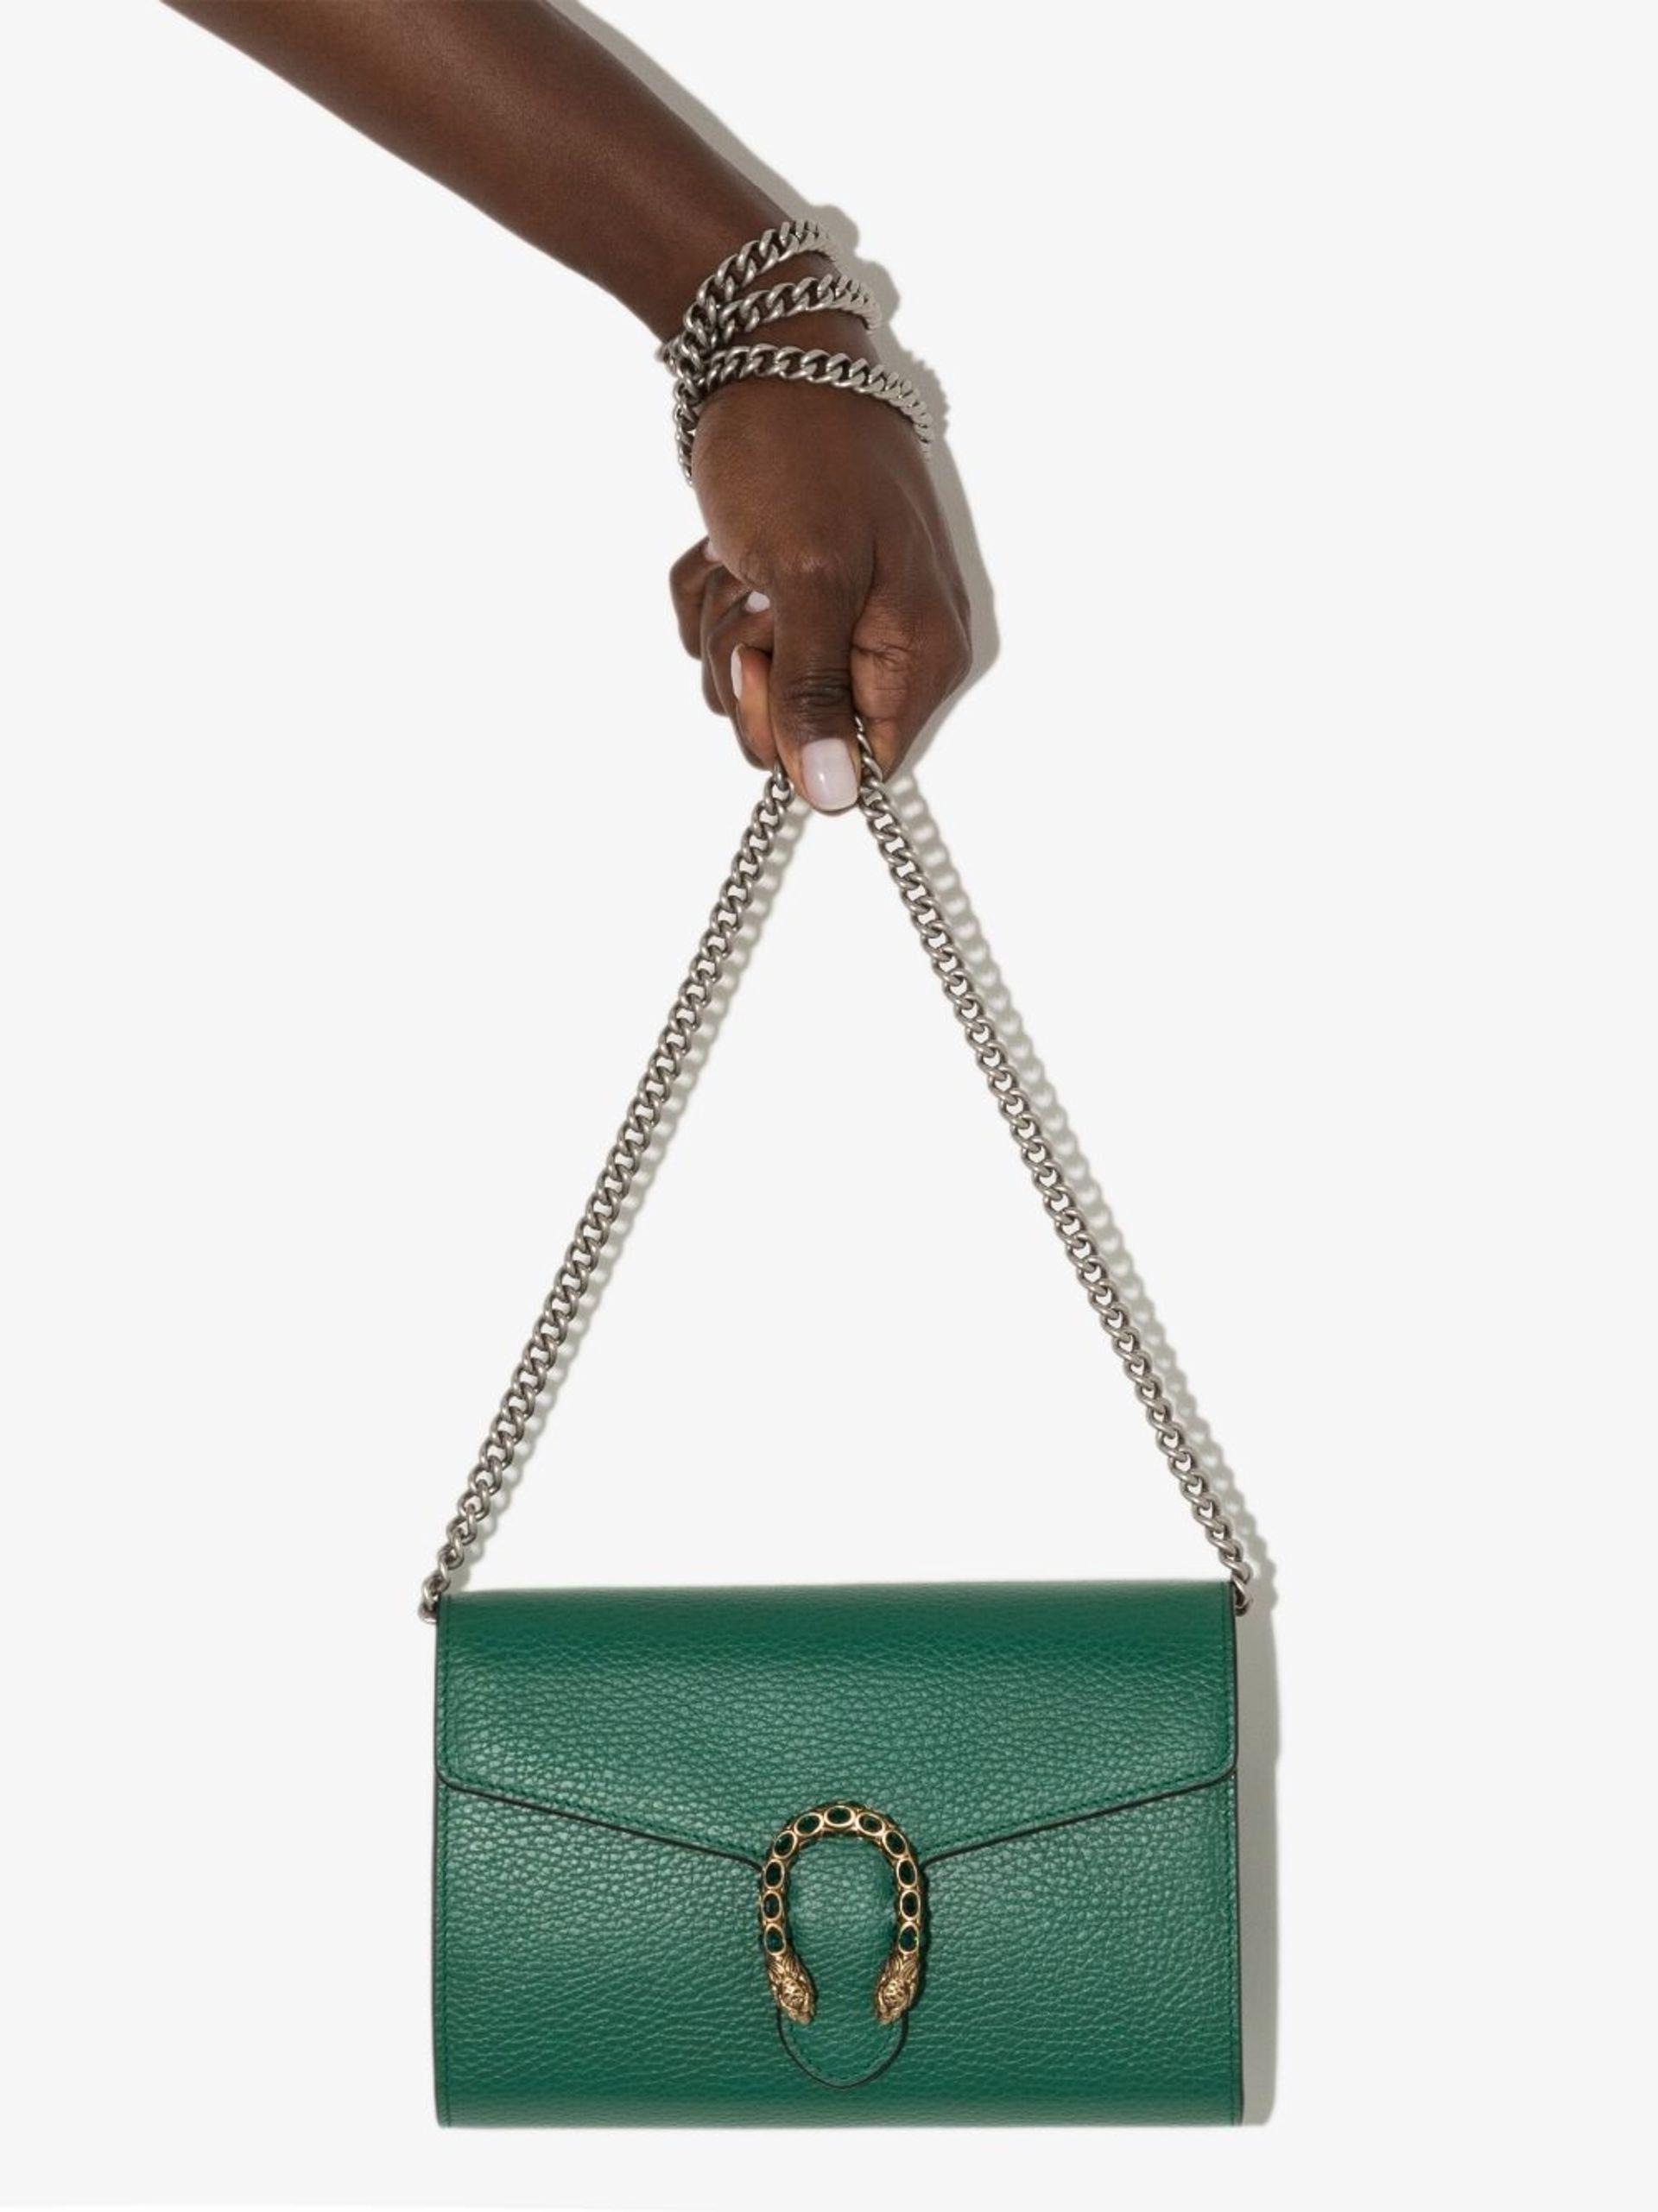 Gucci Dionysus Mini Leather Chain Wallet in Green